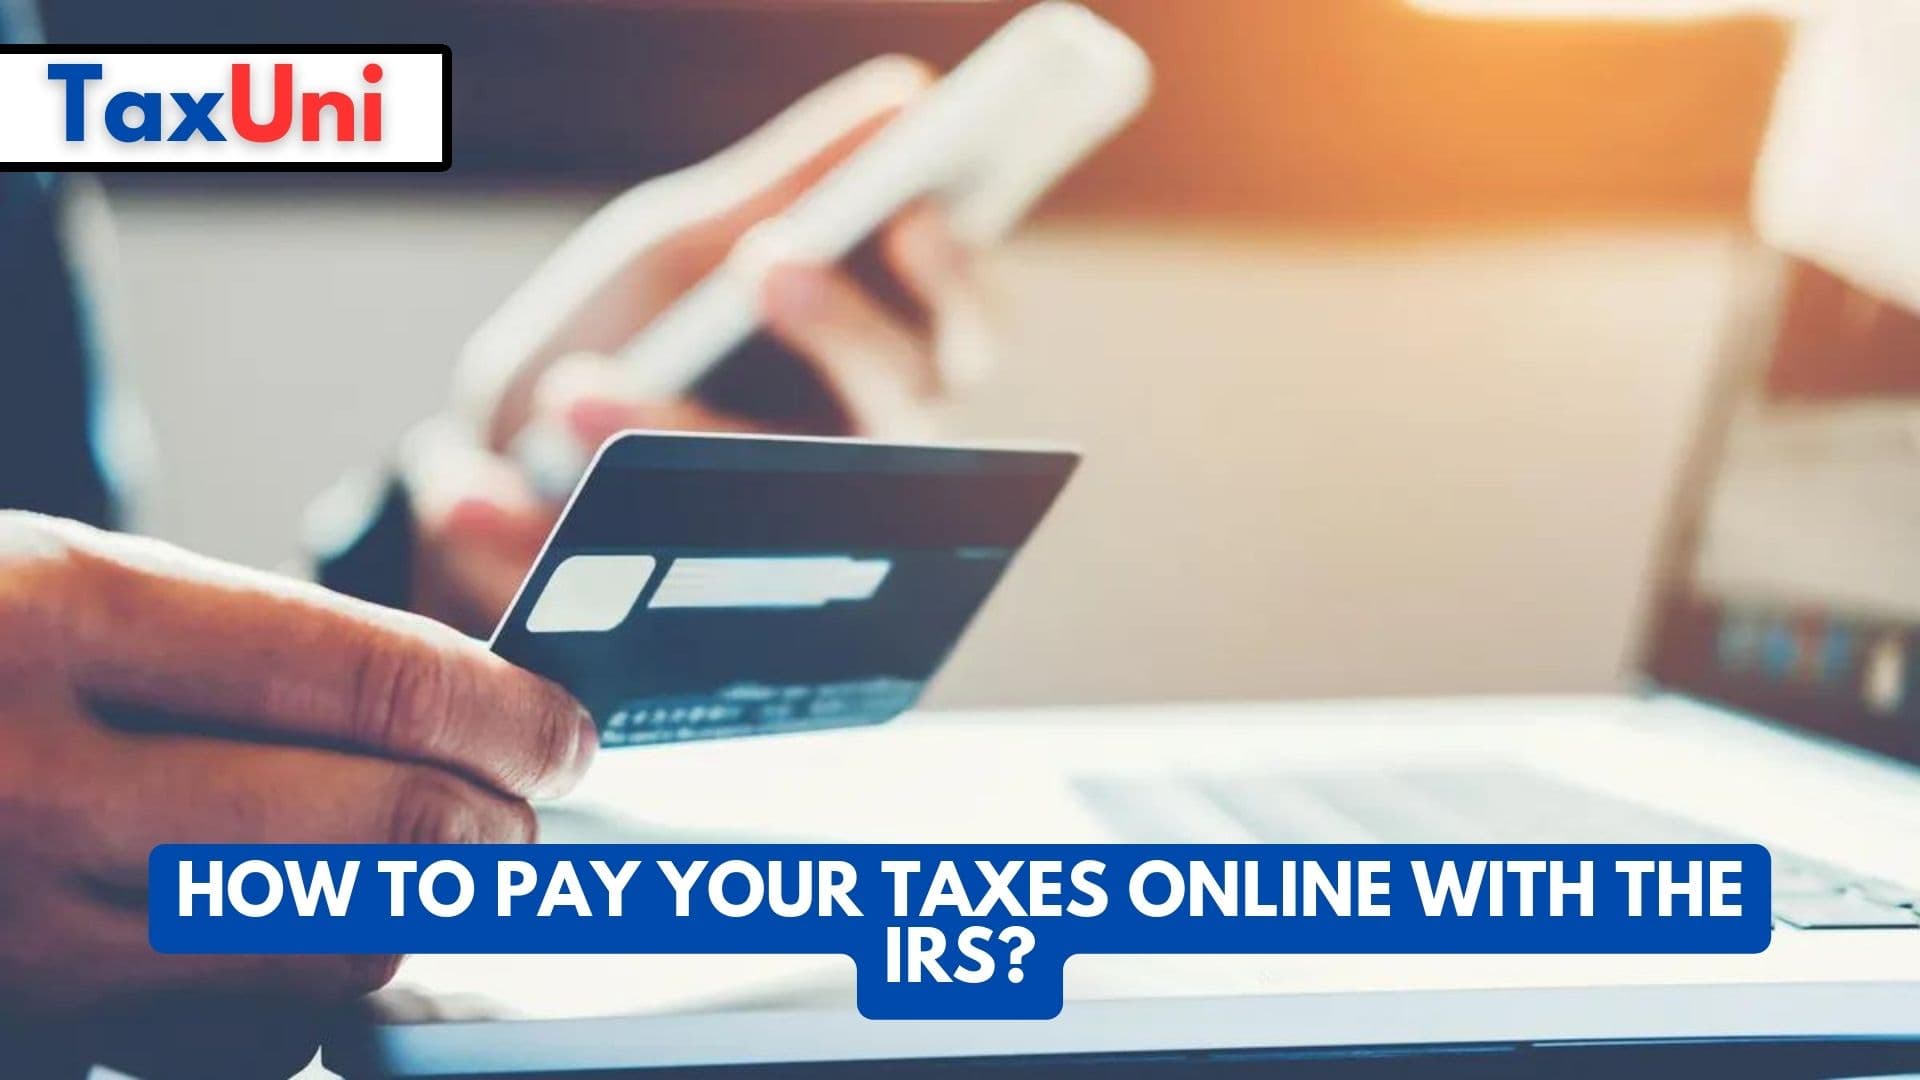 How to Pay Your Taxes Online with the IRS